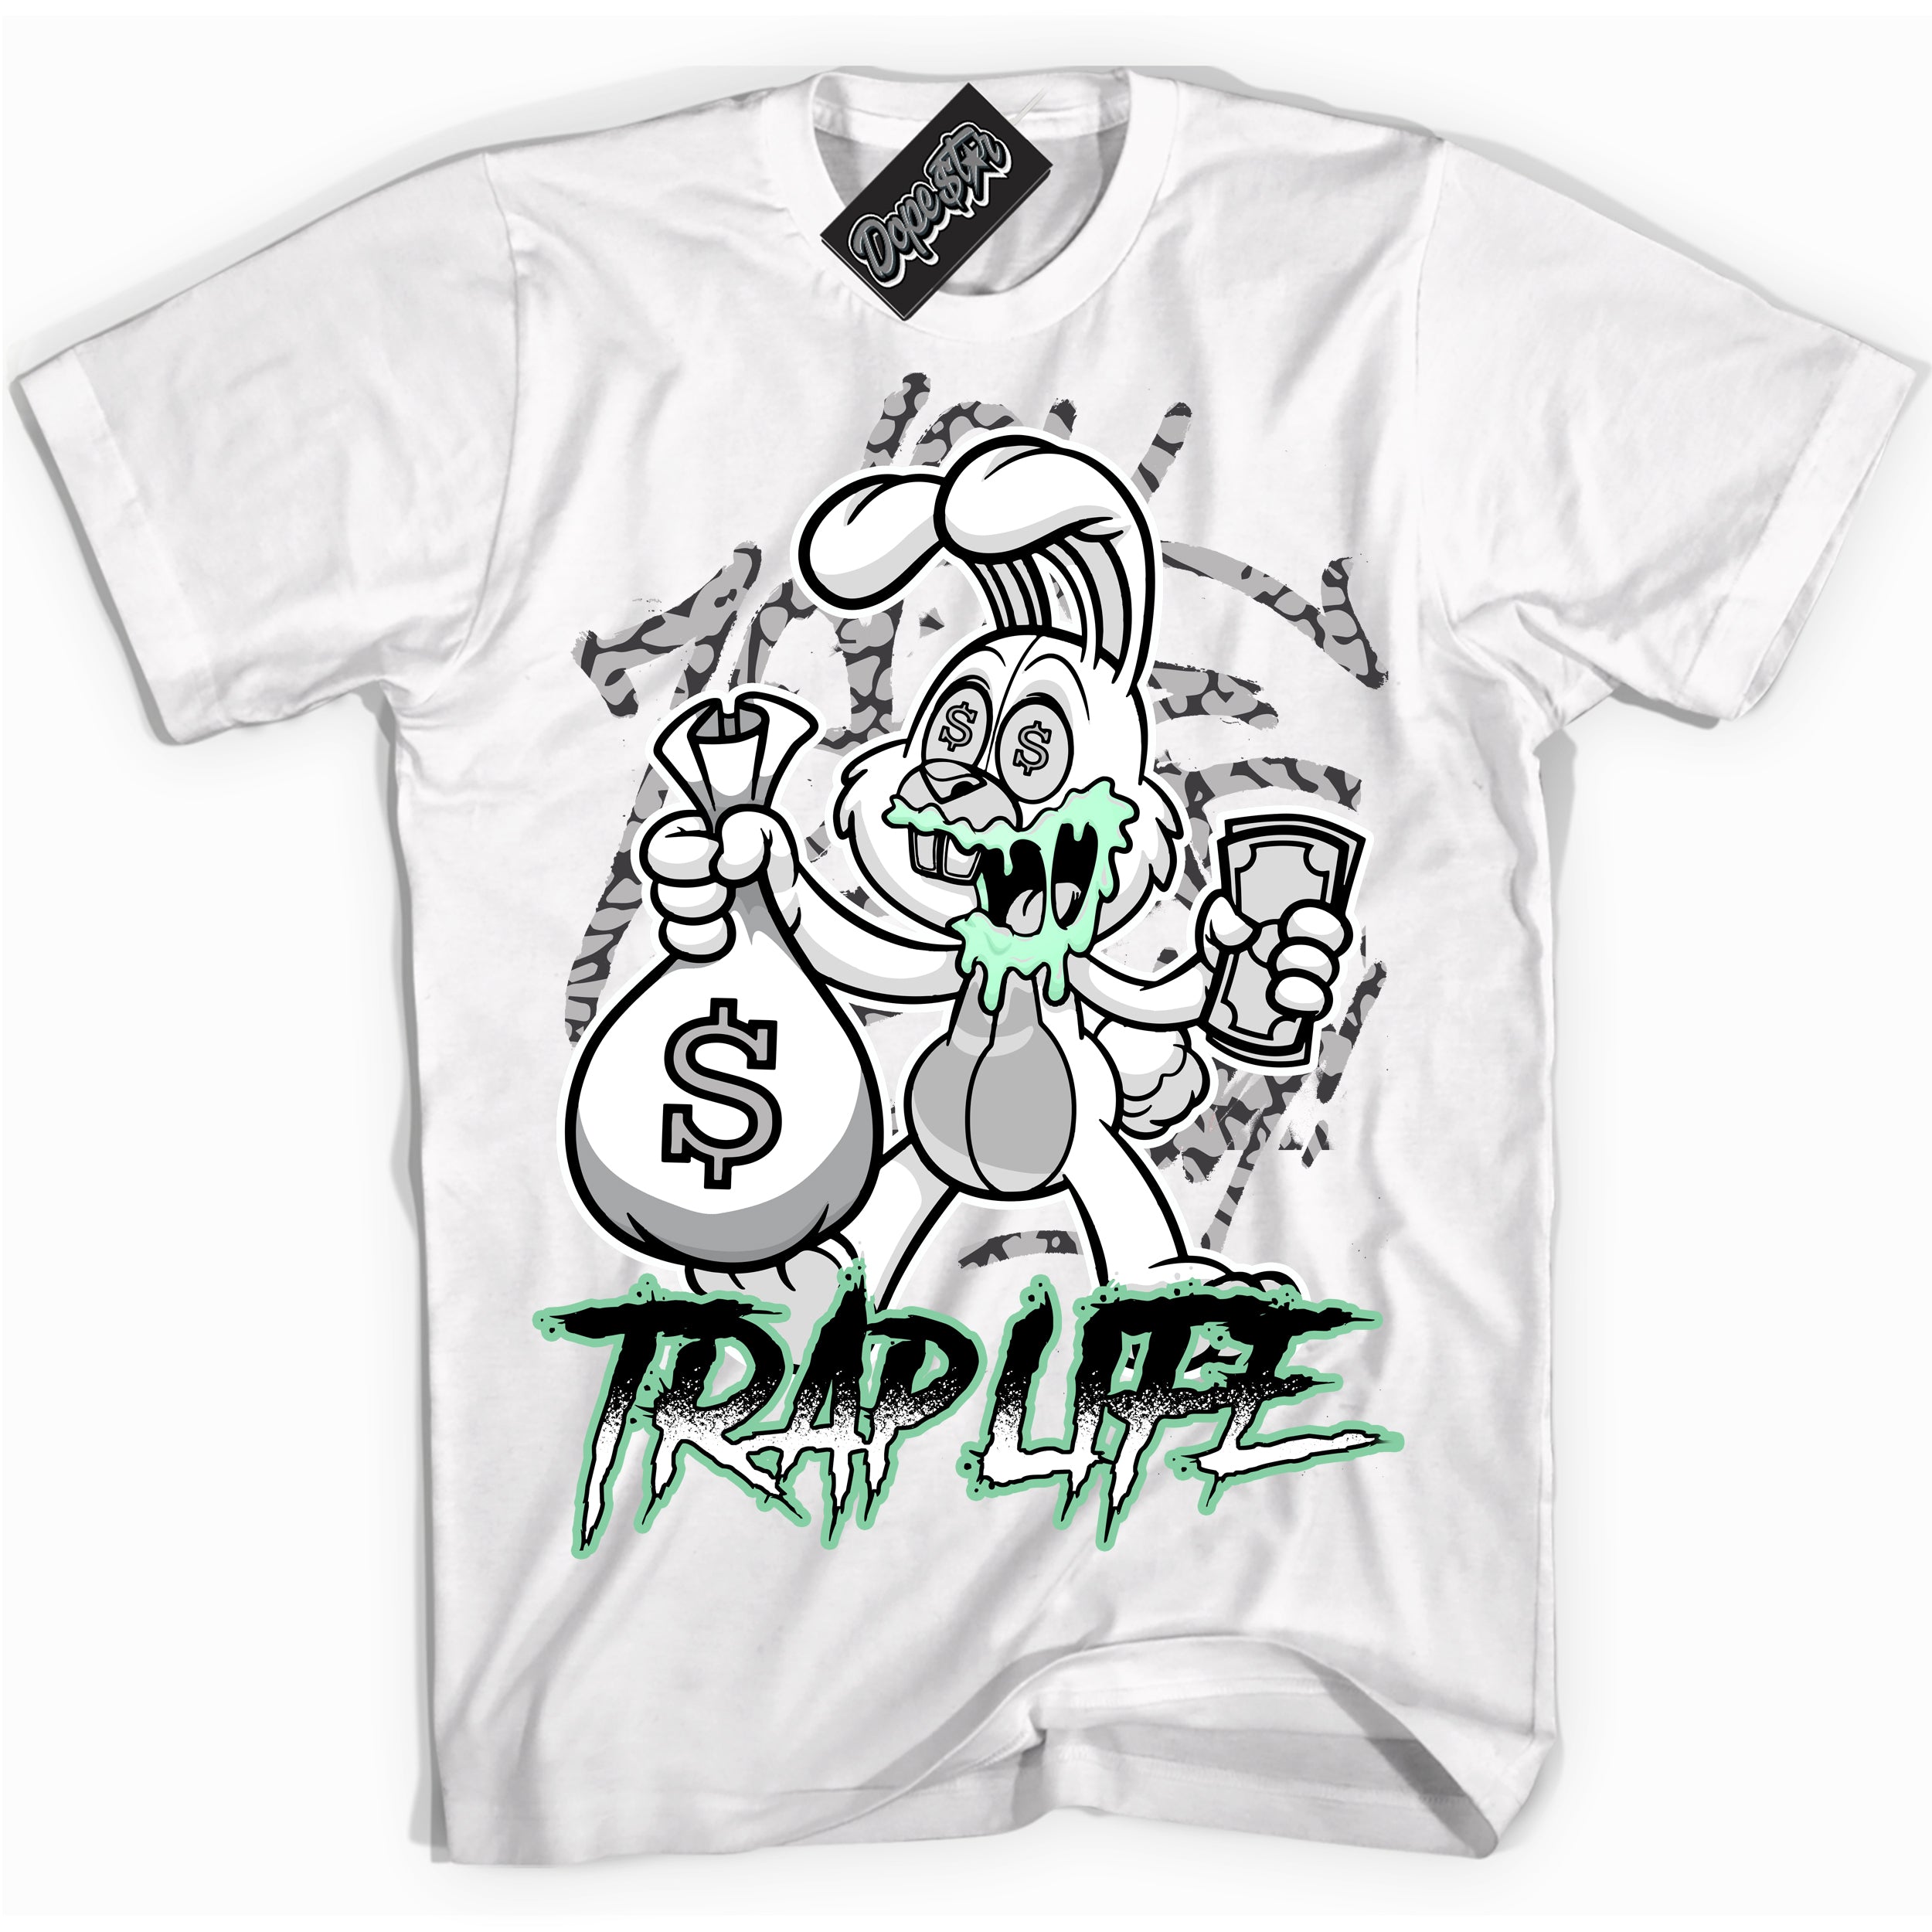 Cool White graphic tee with “ Trap Rabbit ” design, that perfectly matches Green Glow 3s sneakers 